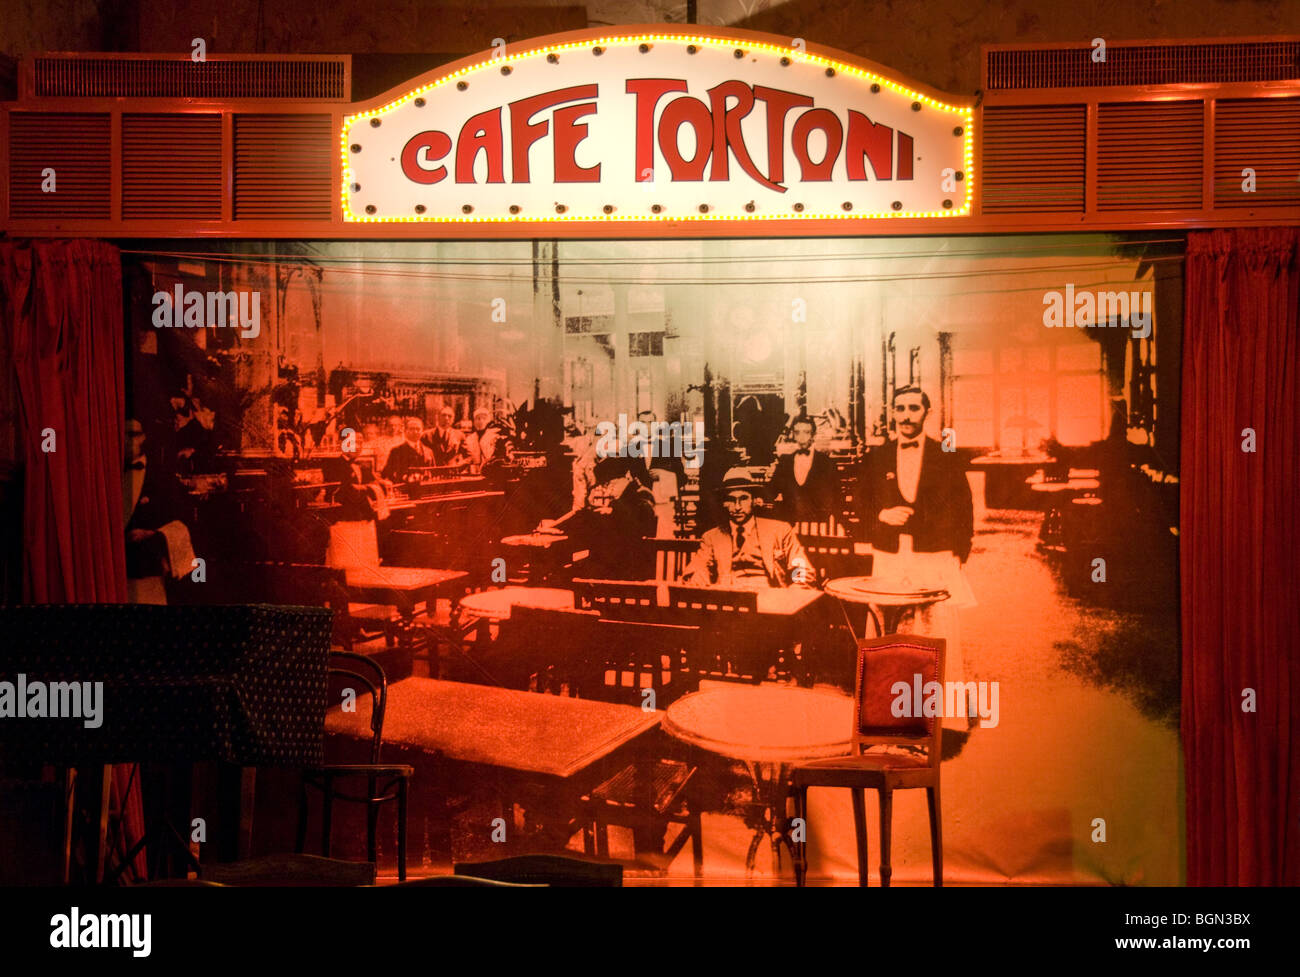 Interior sign of Cafe Tortoni in Buenos Aires, Argentina Stock Photo